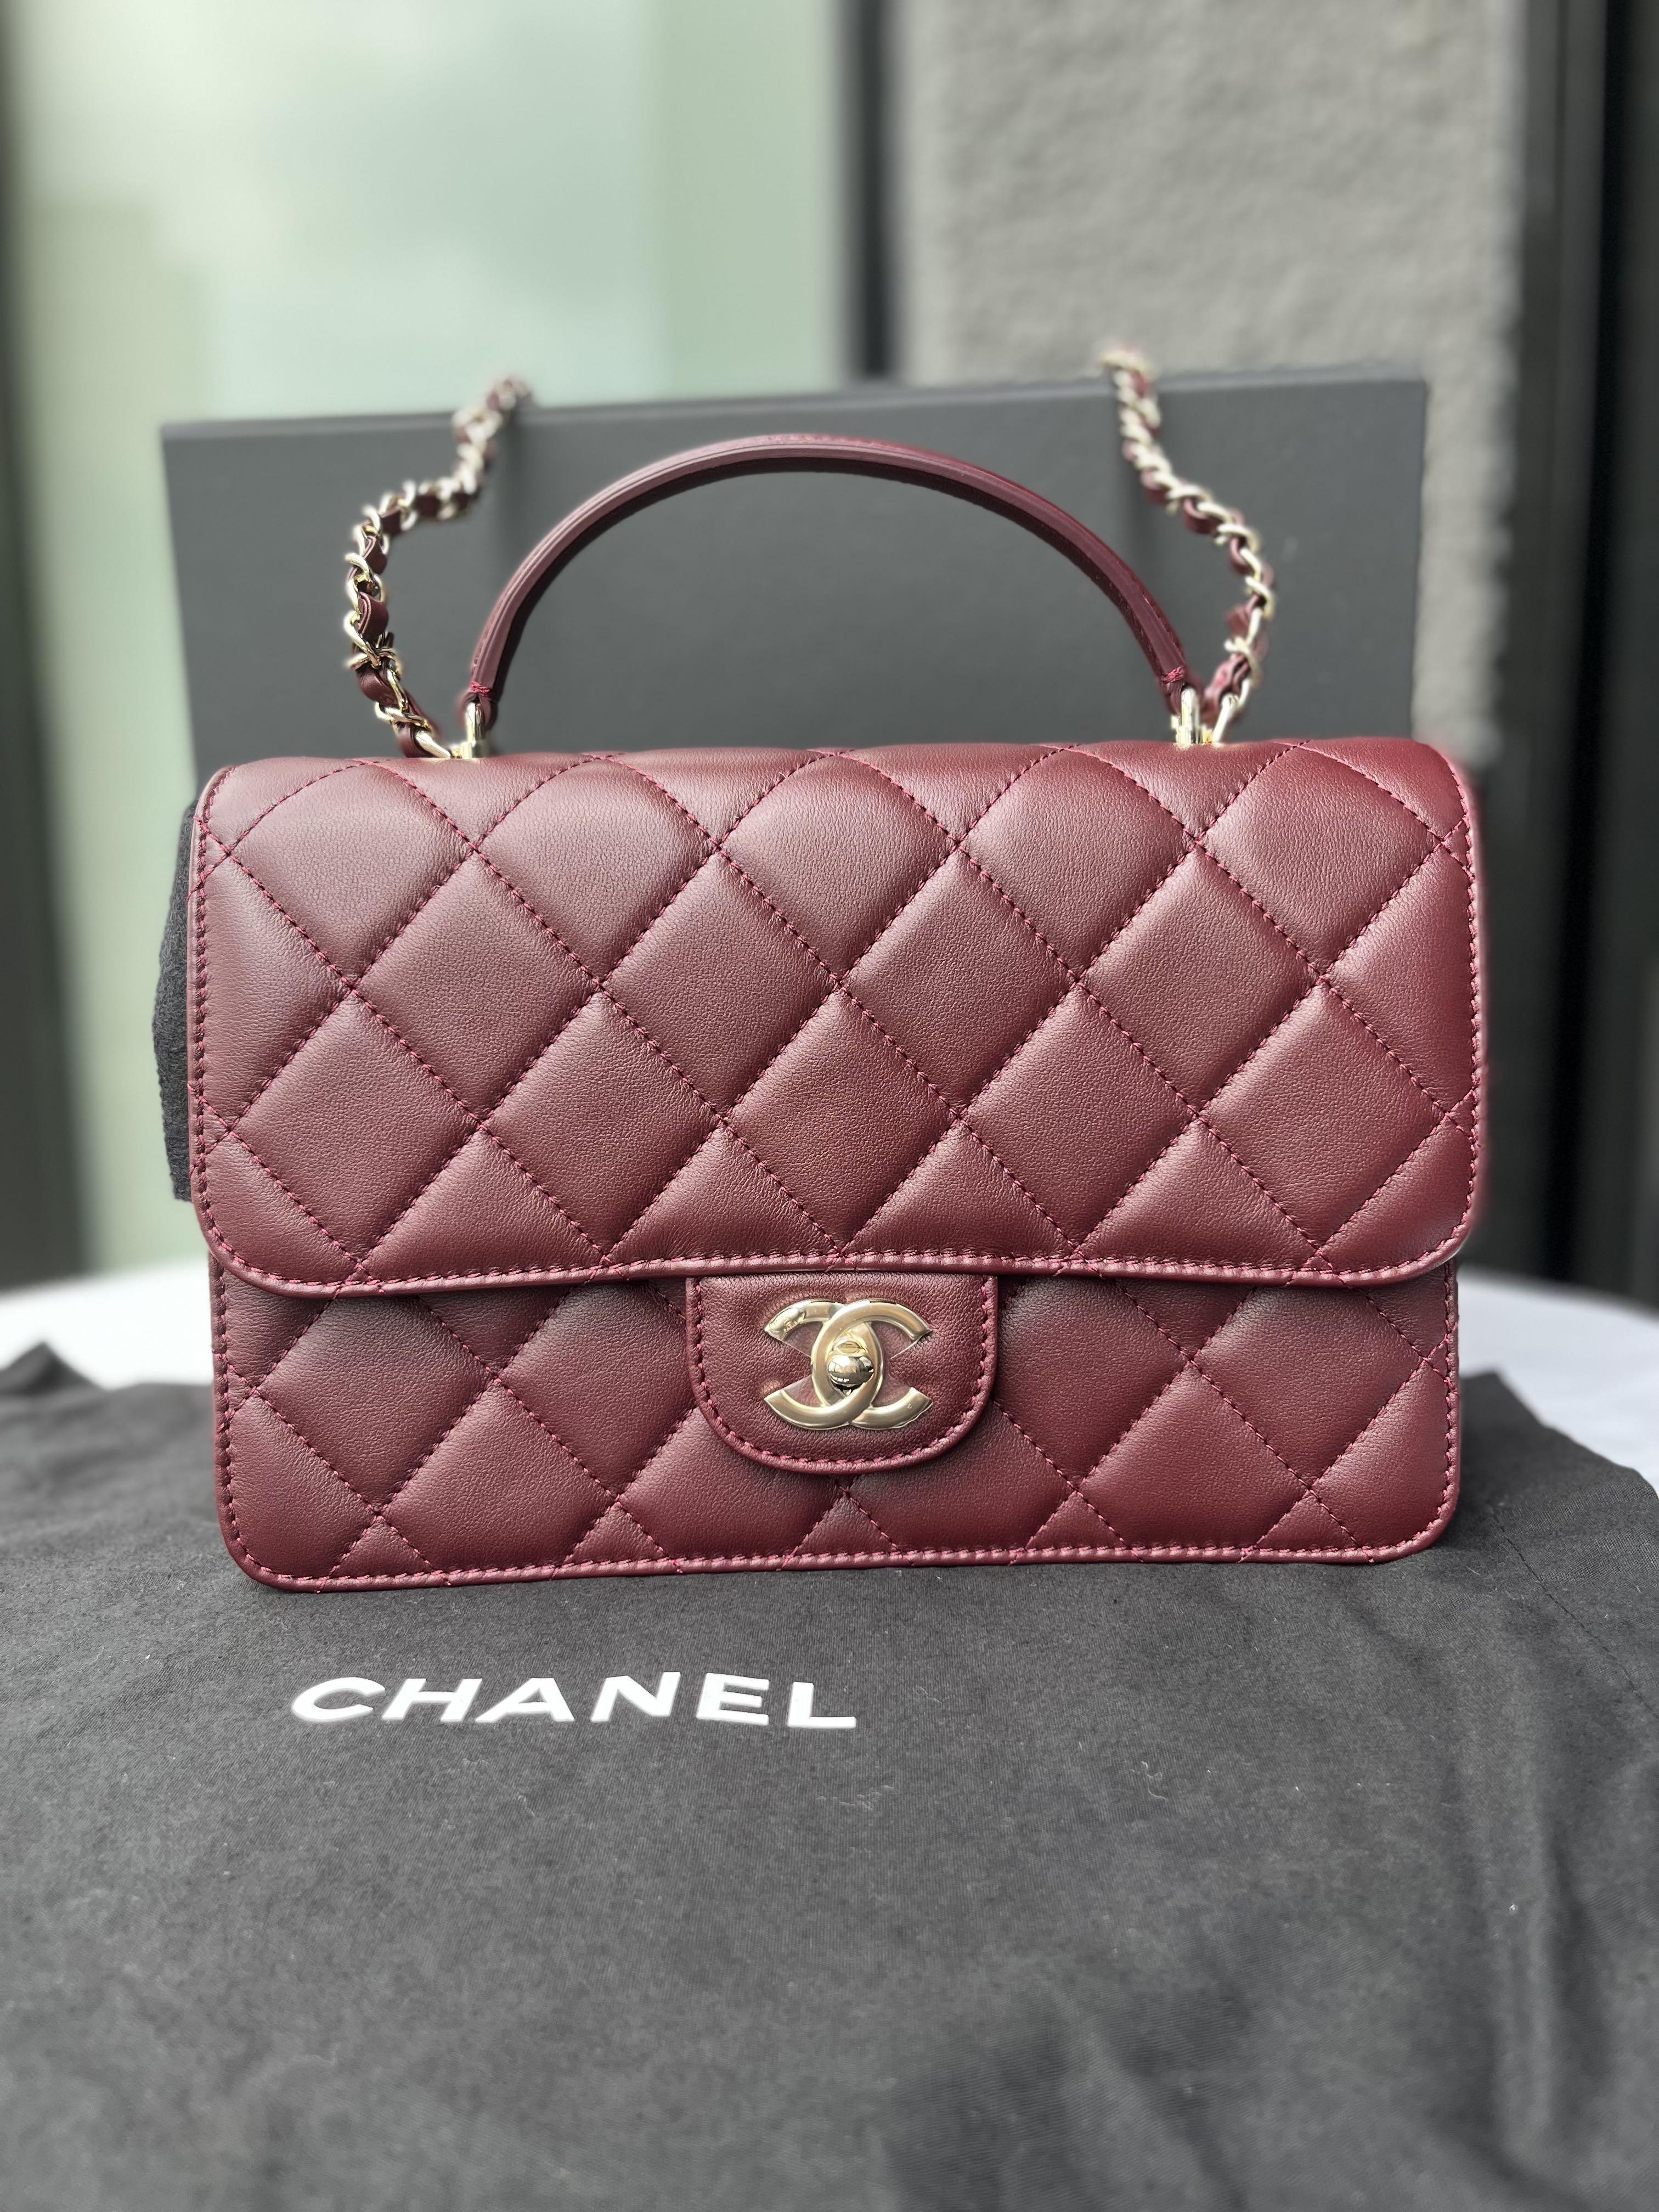 Chanel Flap Bag with top handle in Burgundy